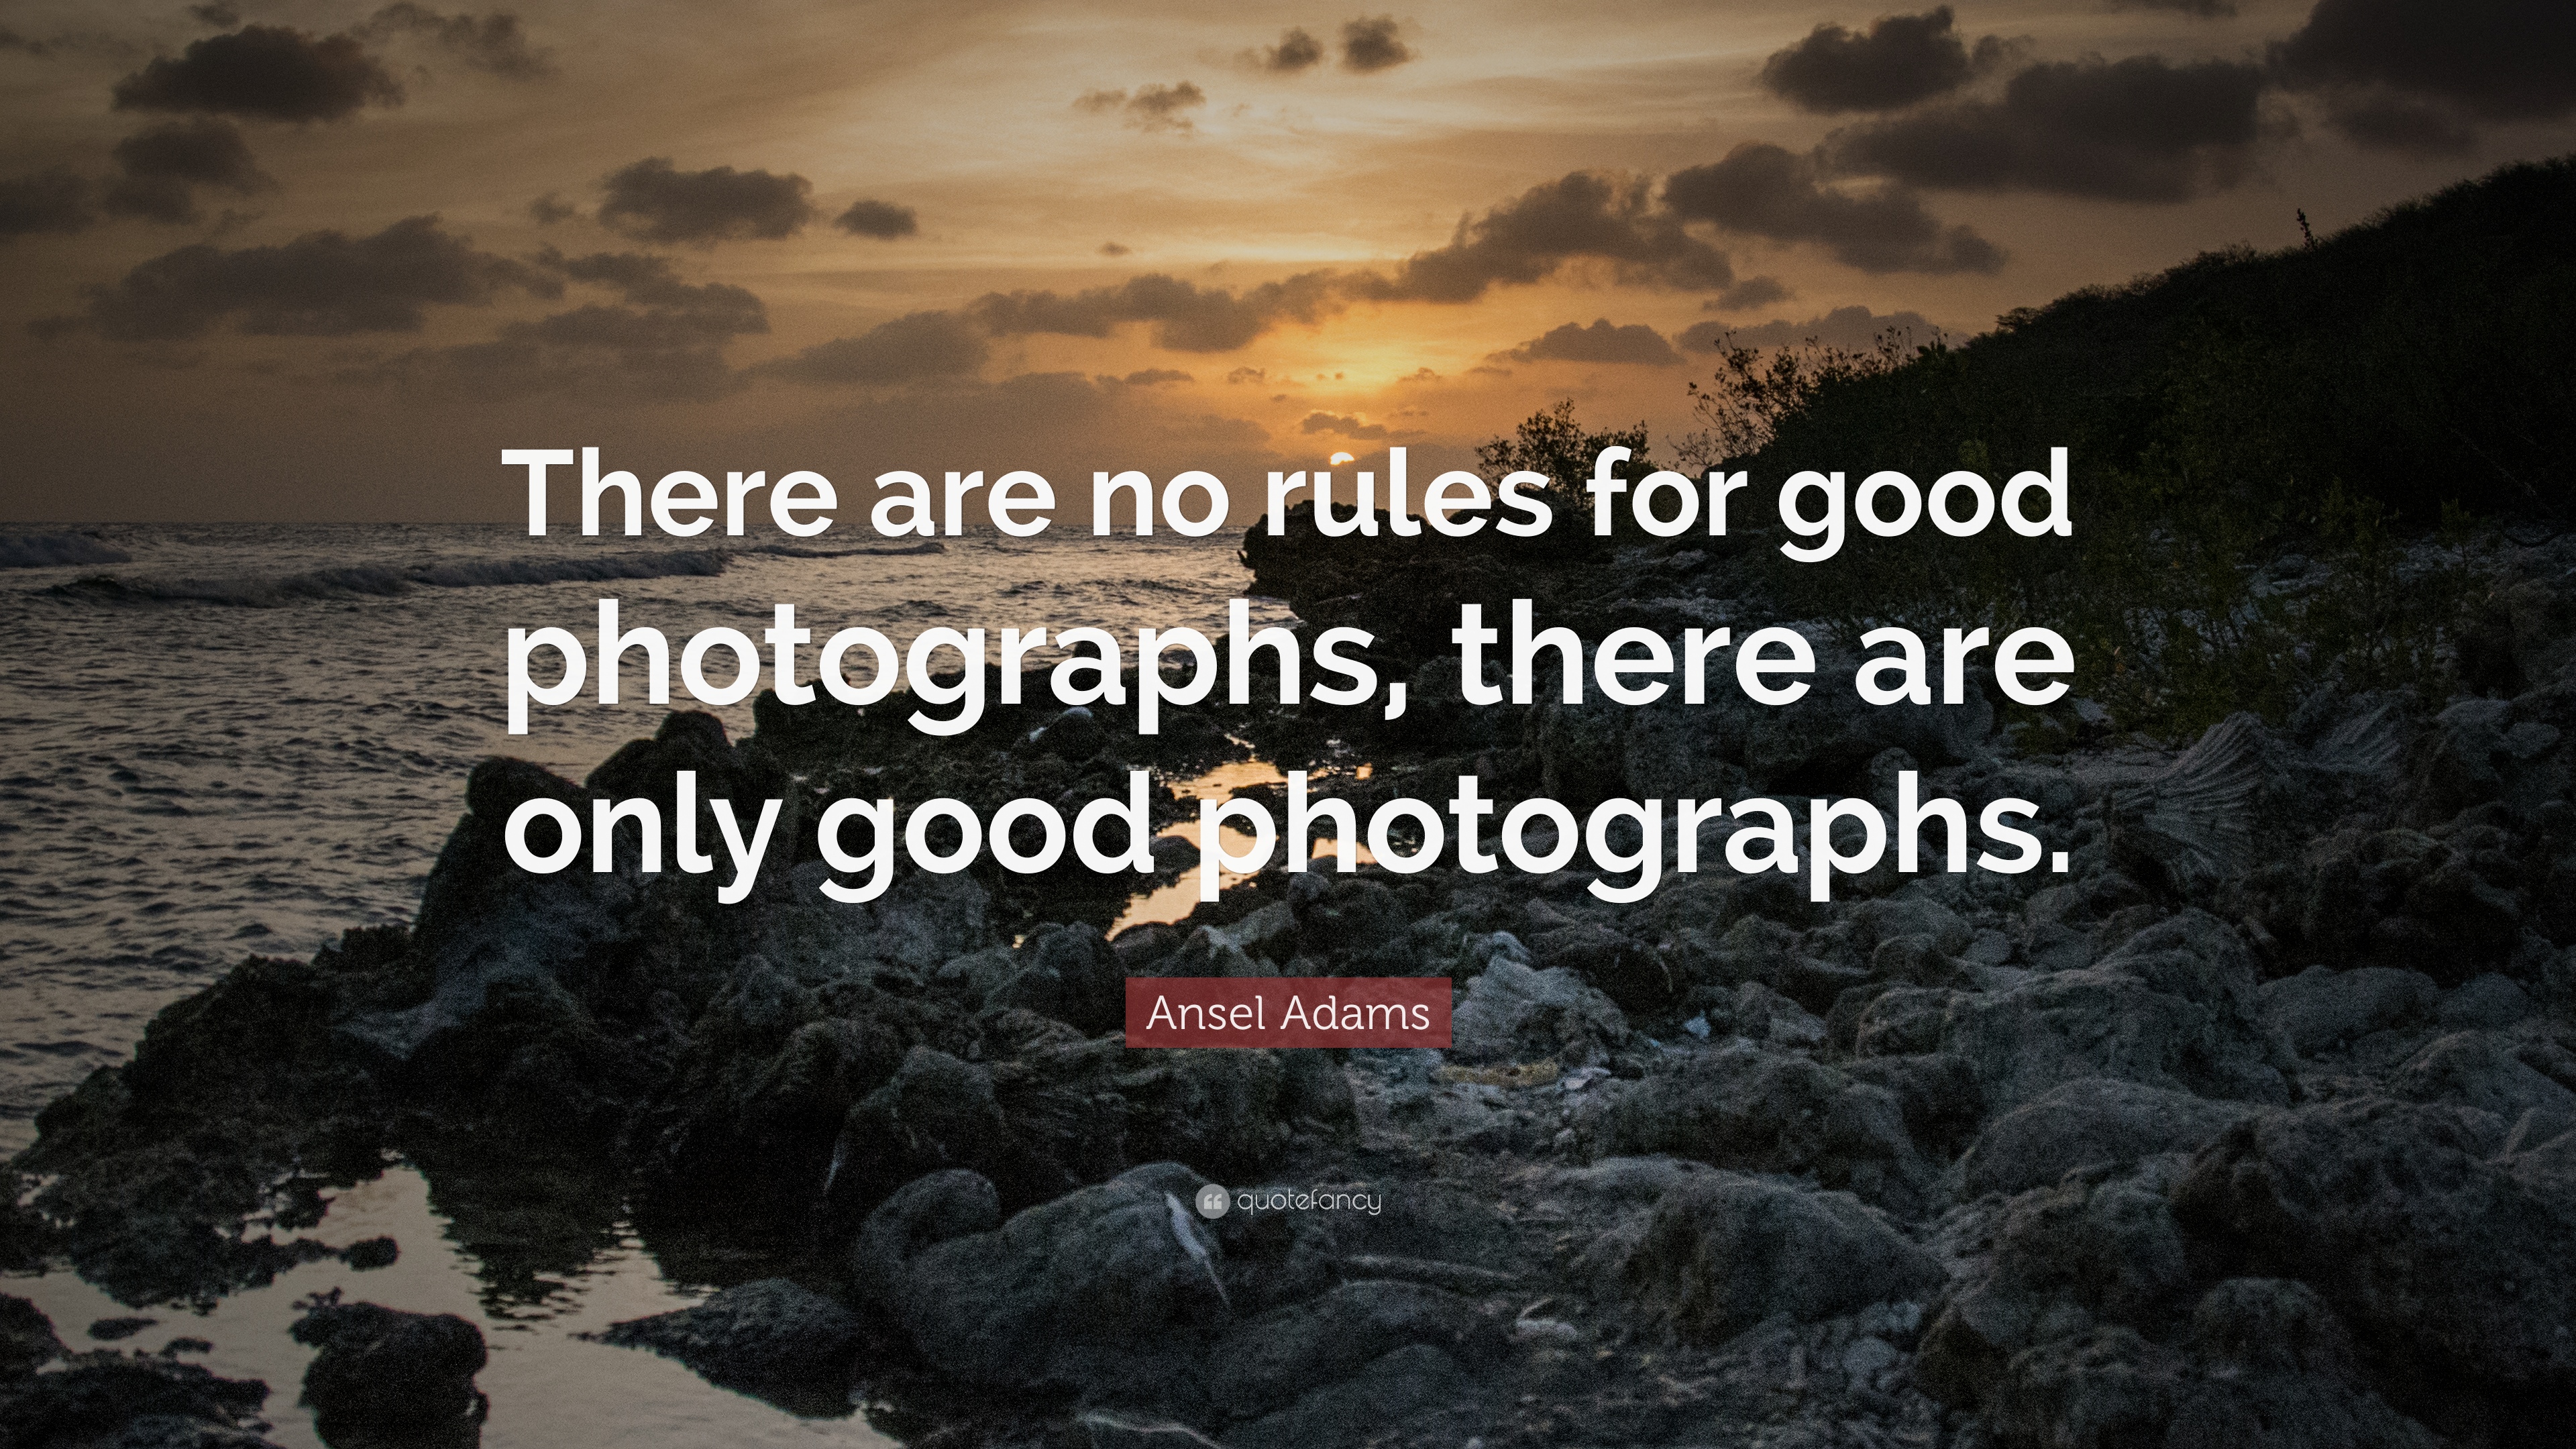 There are no rules for good photographs, there are only good photographs. Ansel Adams